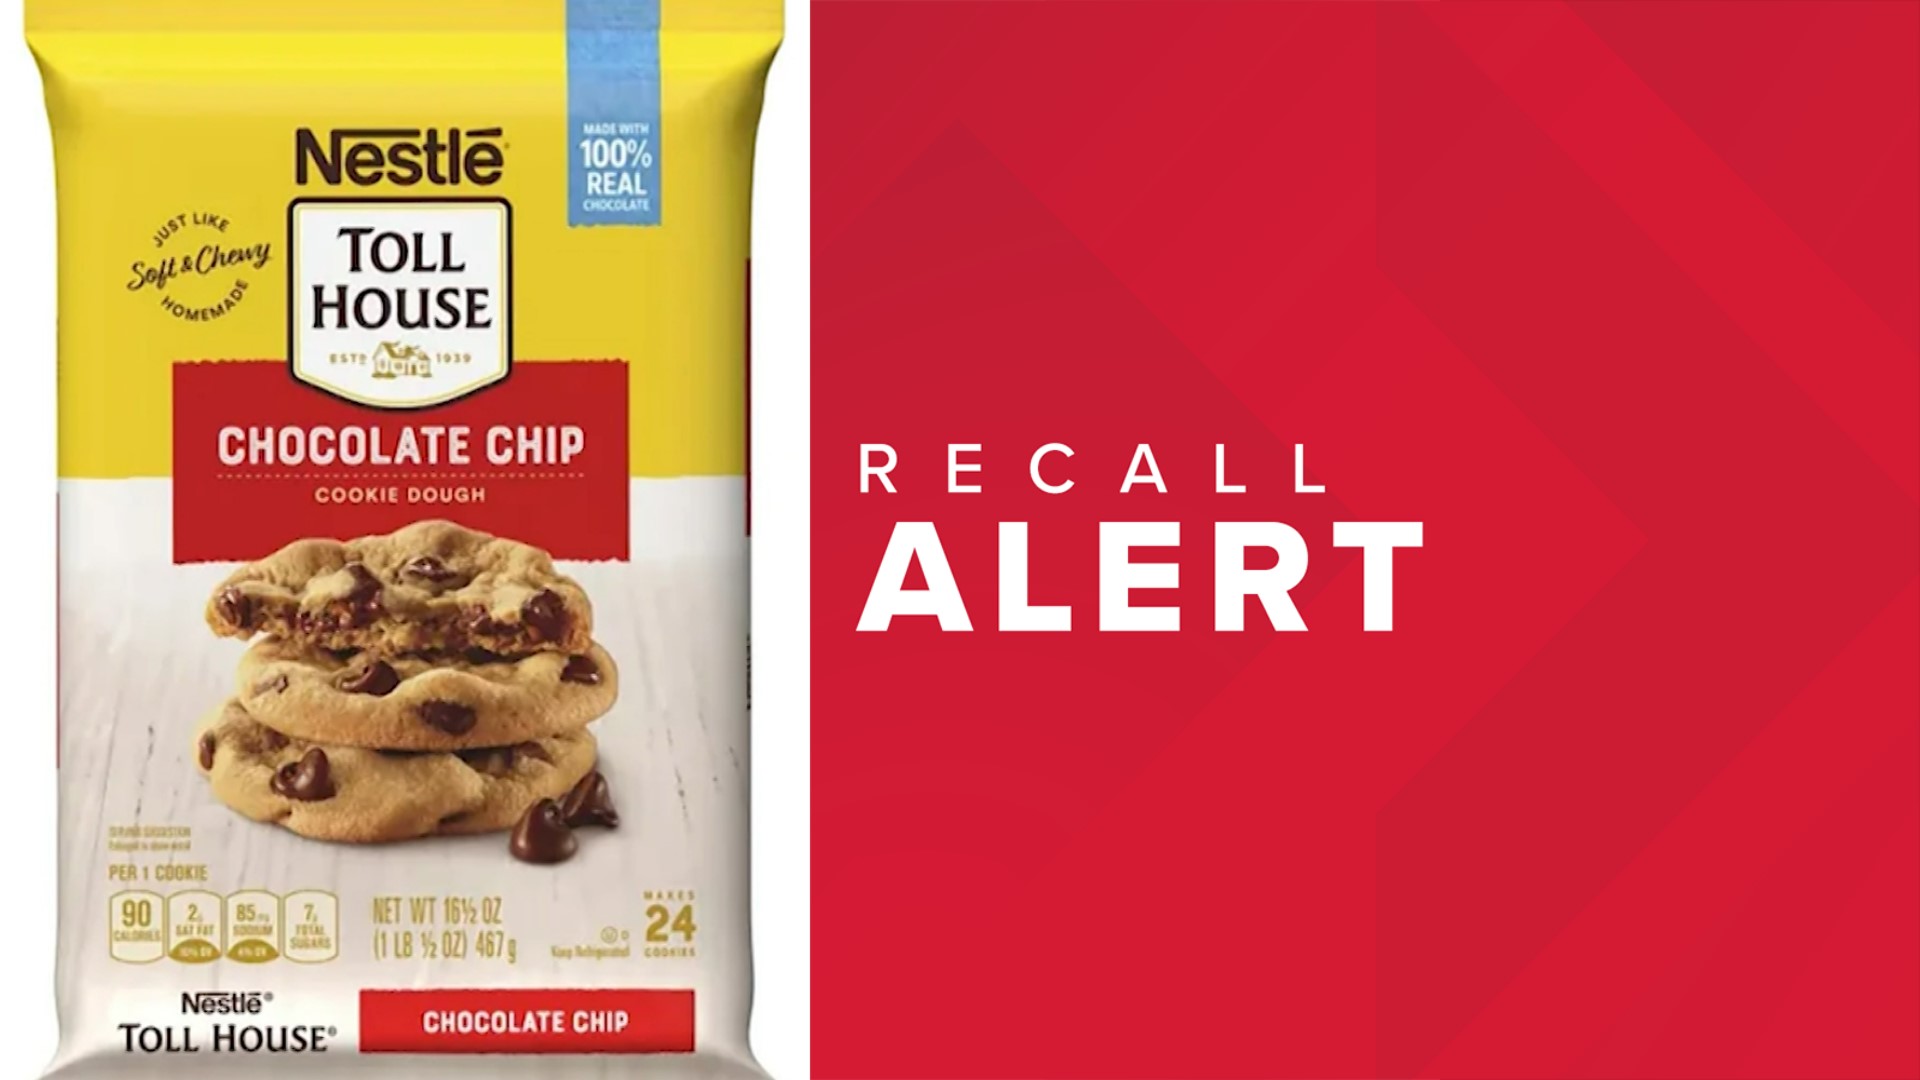 The company said some of its "break and bake" products could contain fragments of wood.